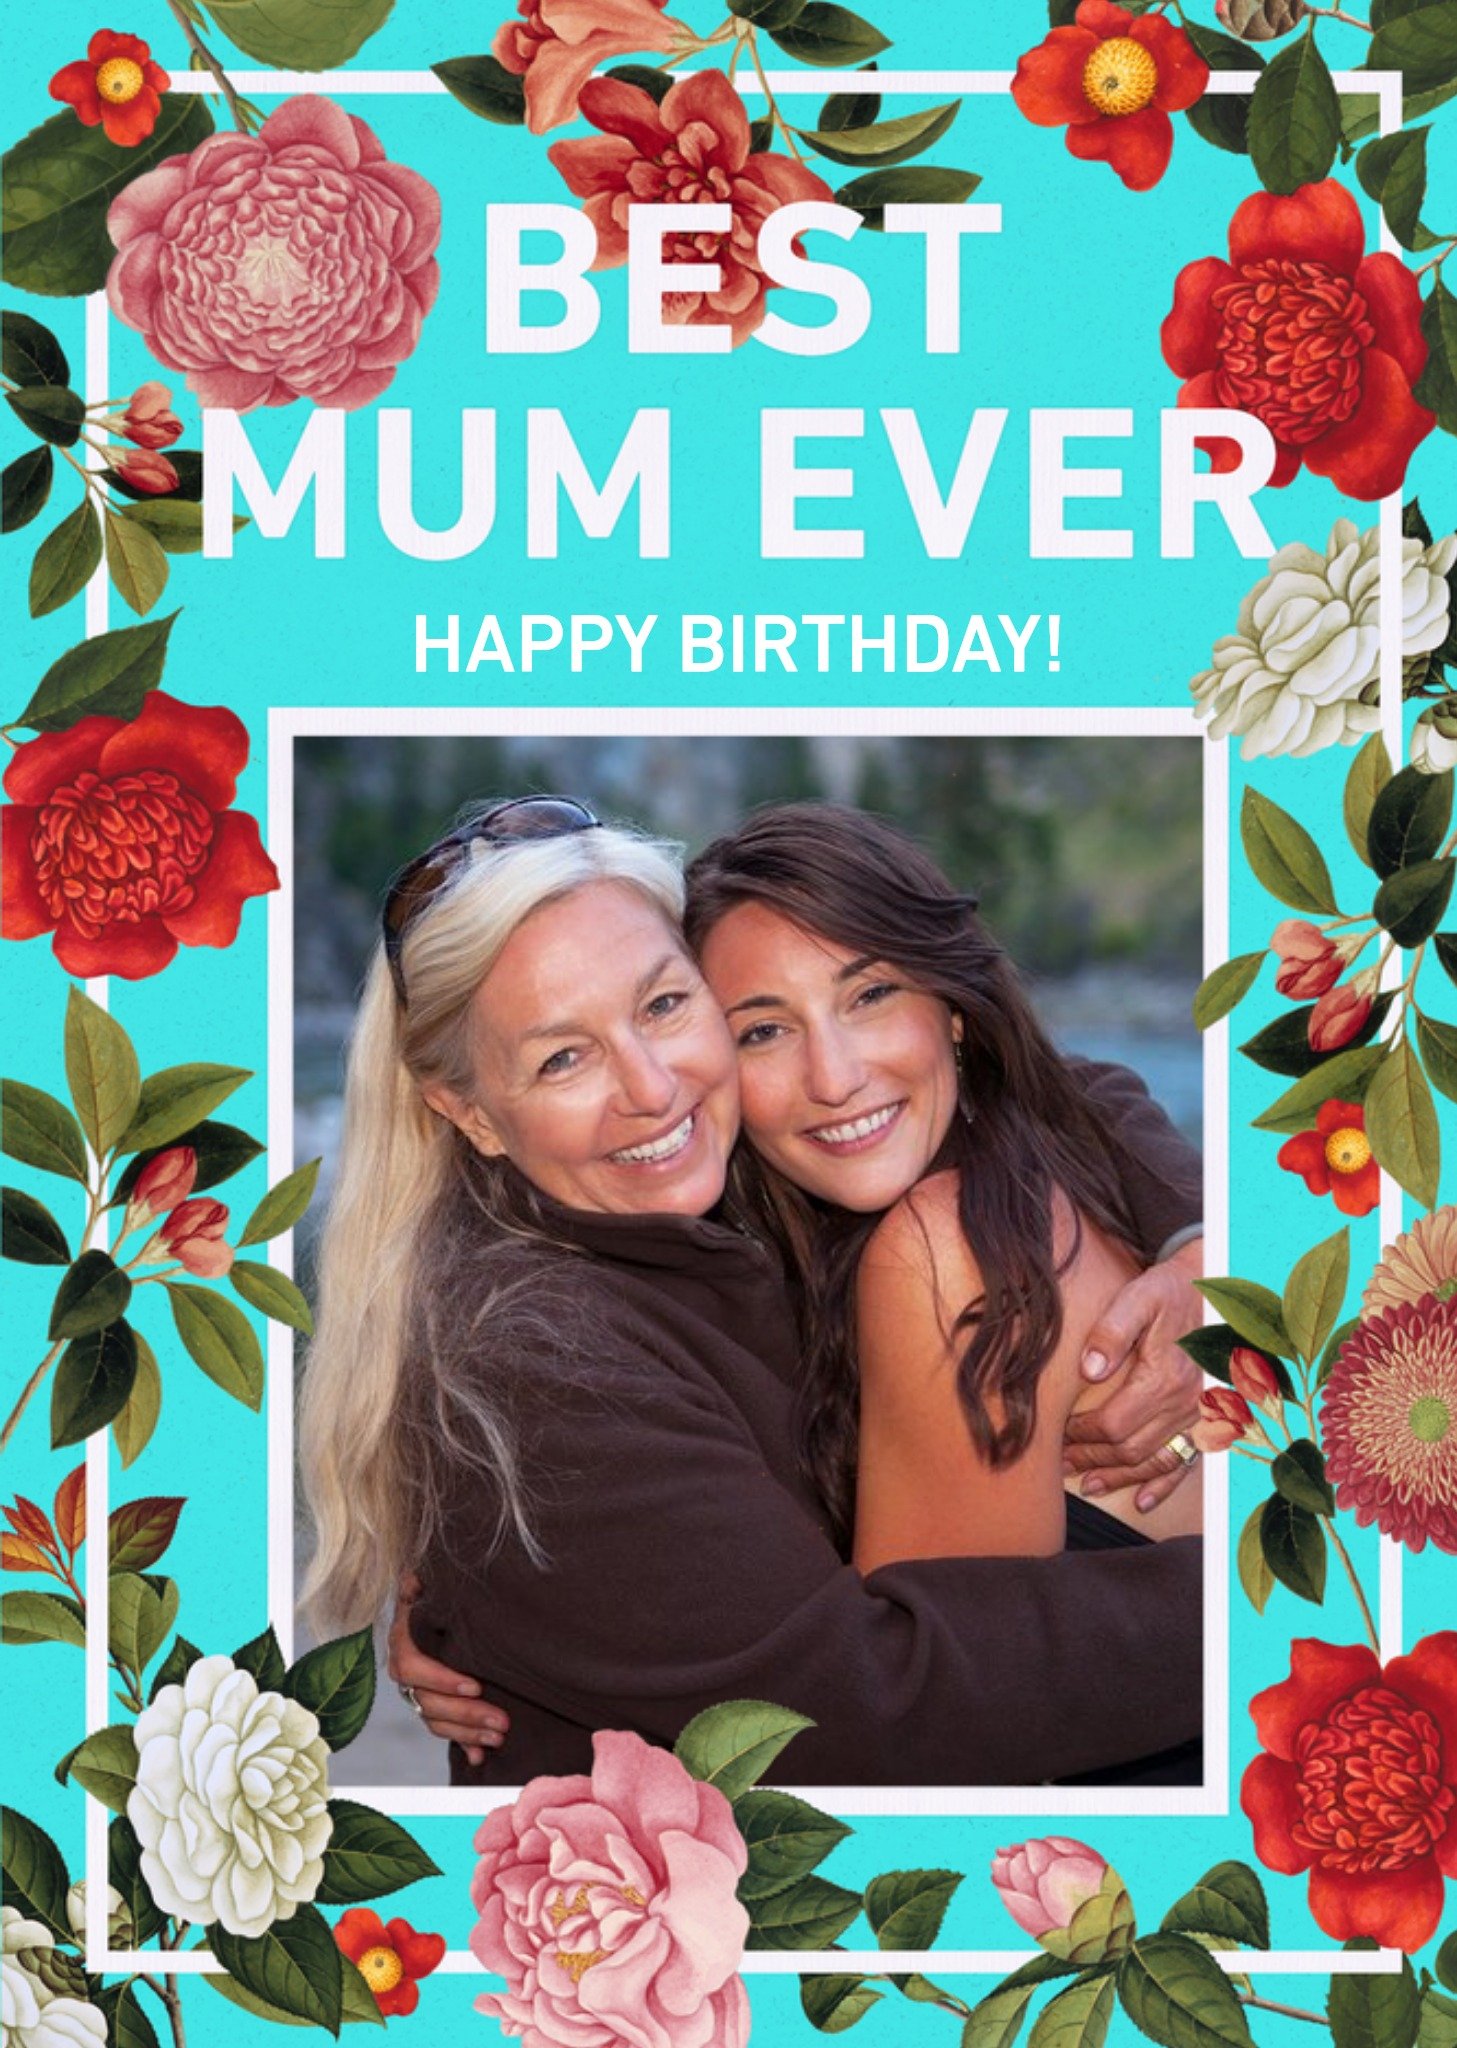 The Natural History Museum Natural History Museum Best Mum Ever Photo Upload Birthday Card Ecard